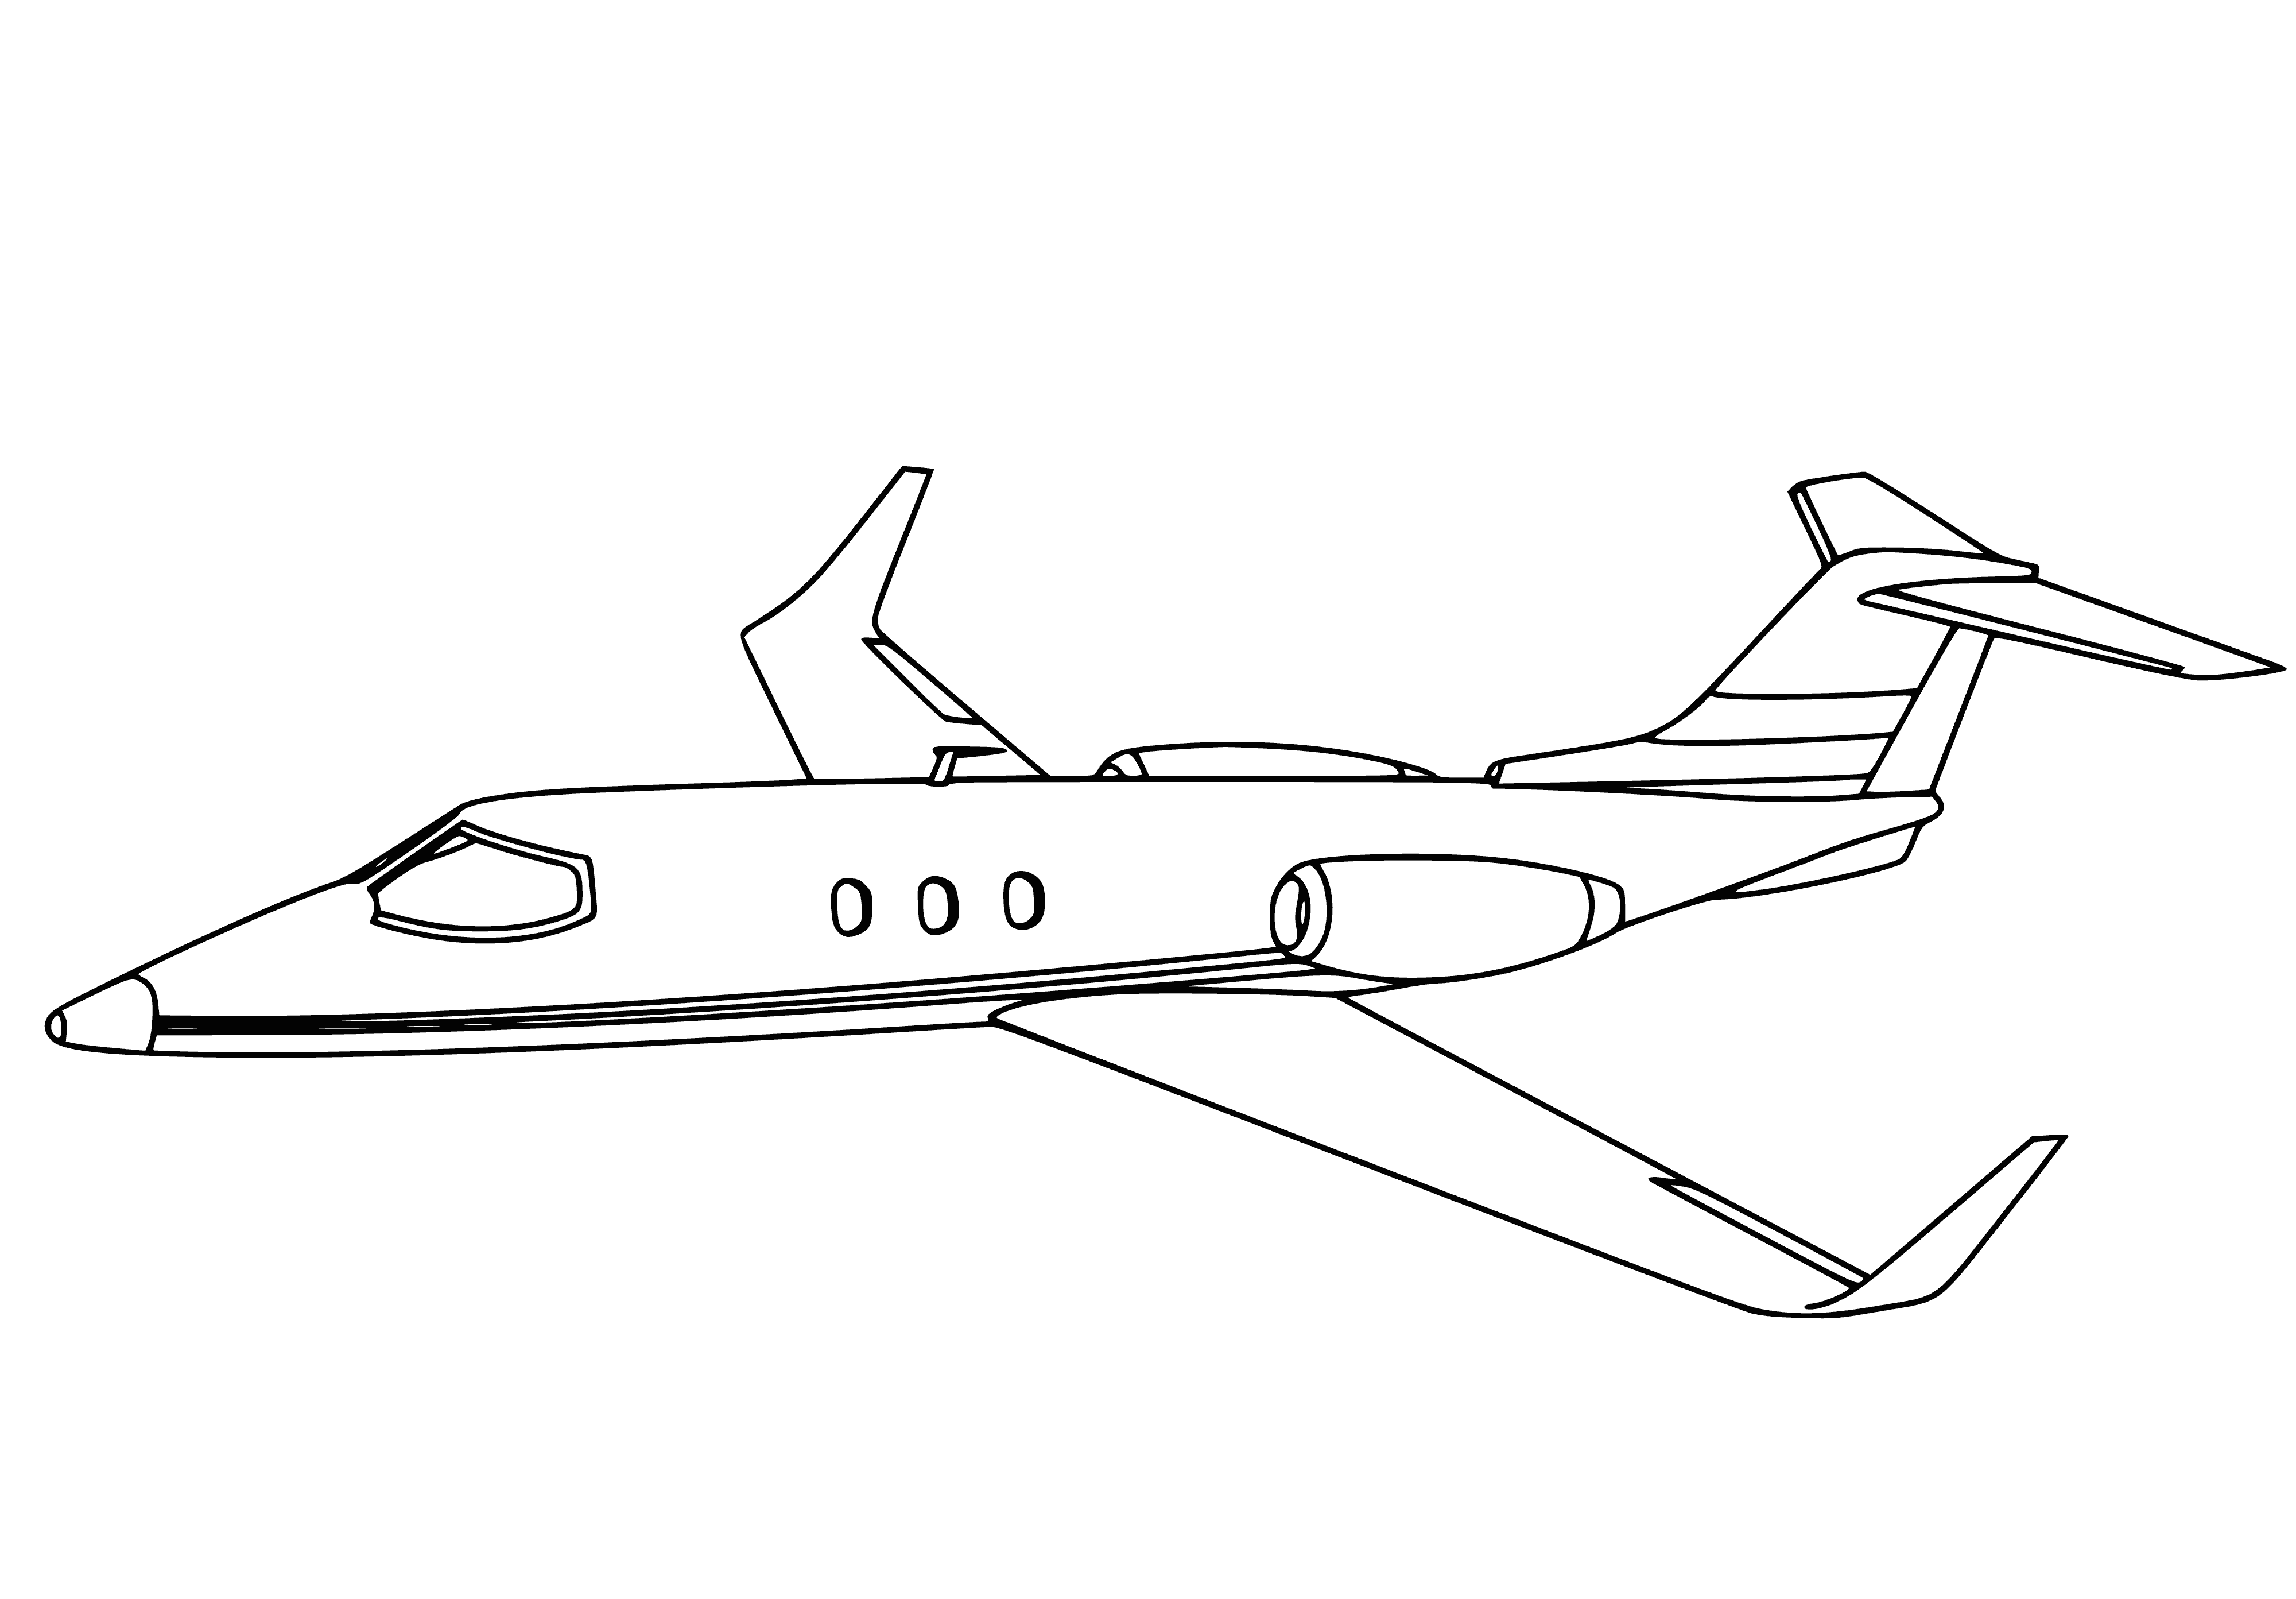 coloring page: An airplane is a powered flying vehicle with wings to sustain flight through propellers or jets.